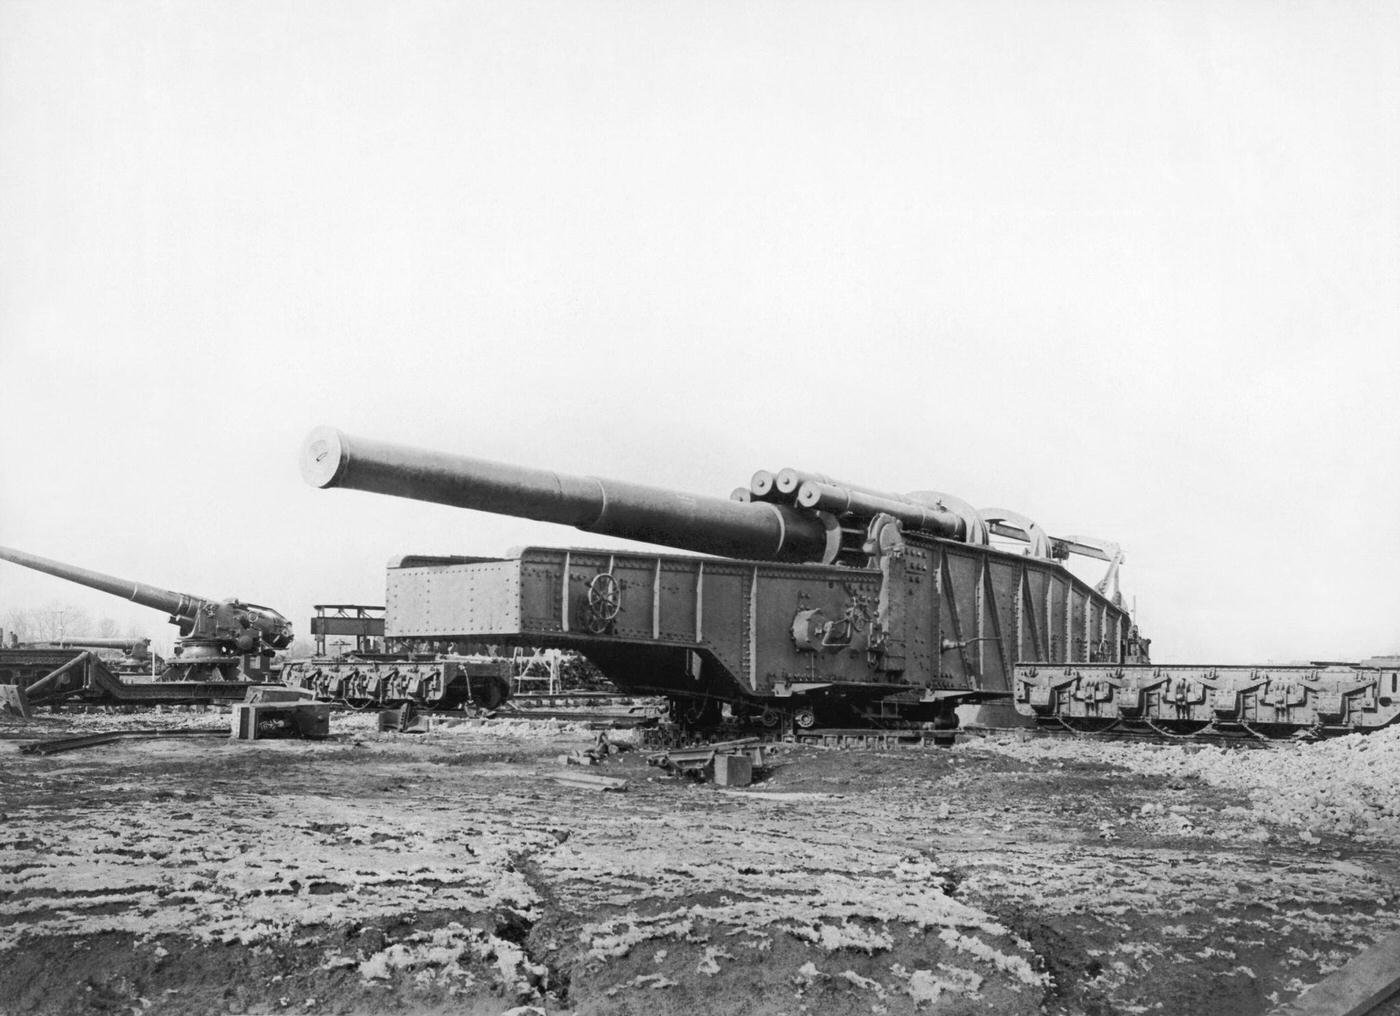 One of the big 14-inch guns used in the war against the Germans, firing a 1200-pound shell with a range of 19 miles, February 11, 1919.